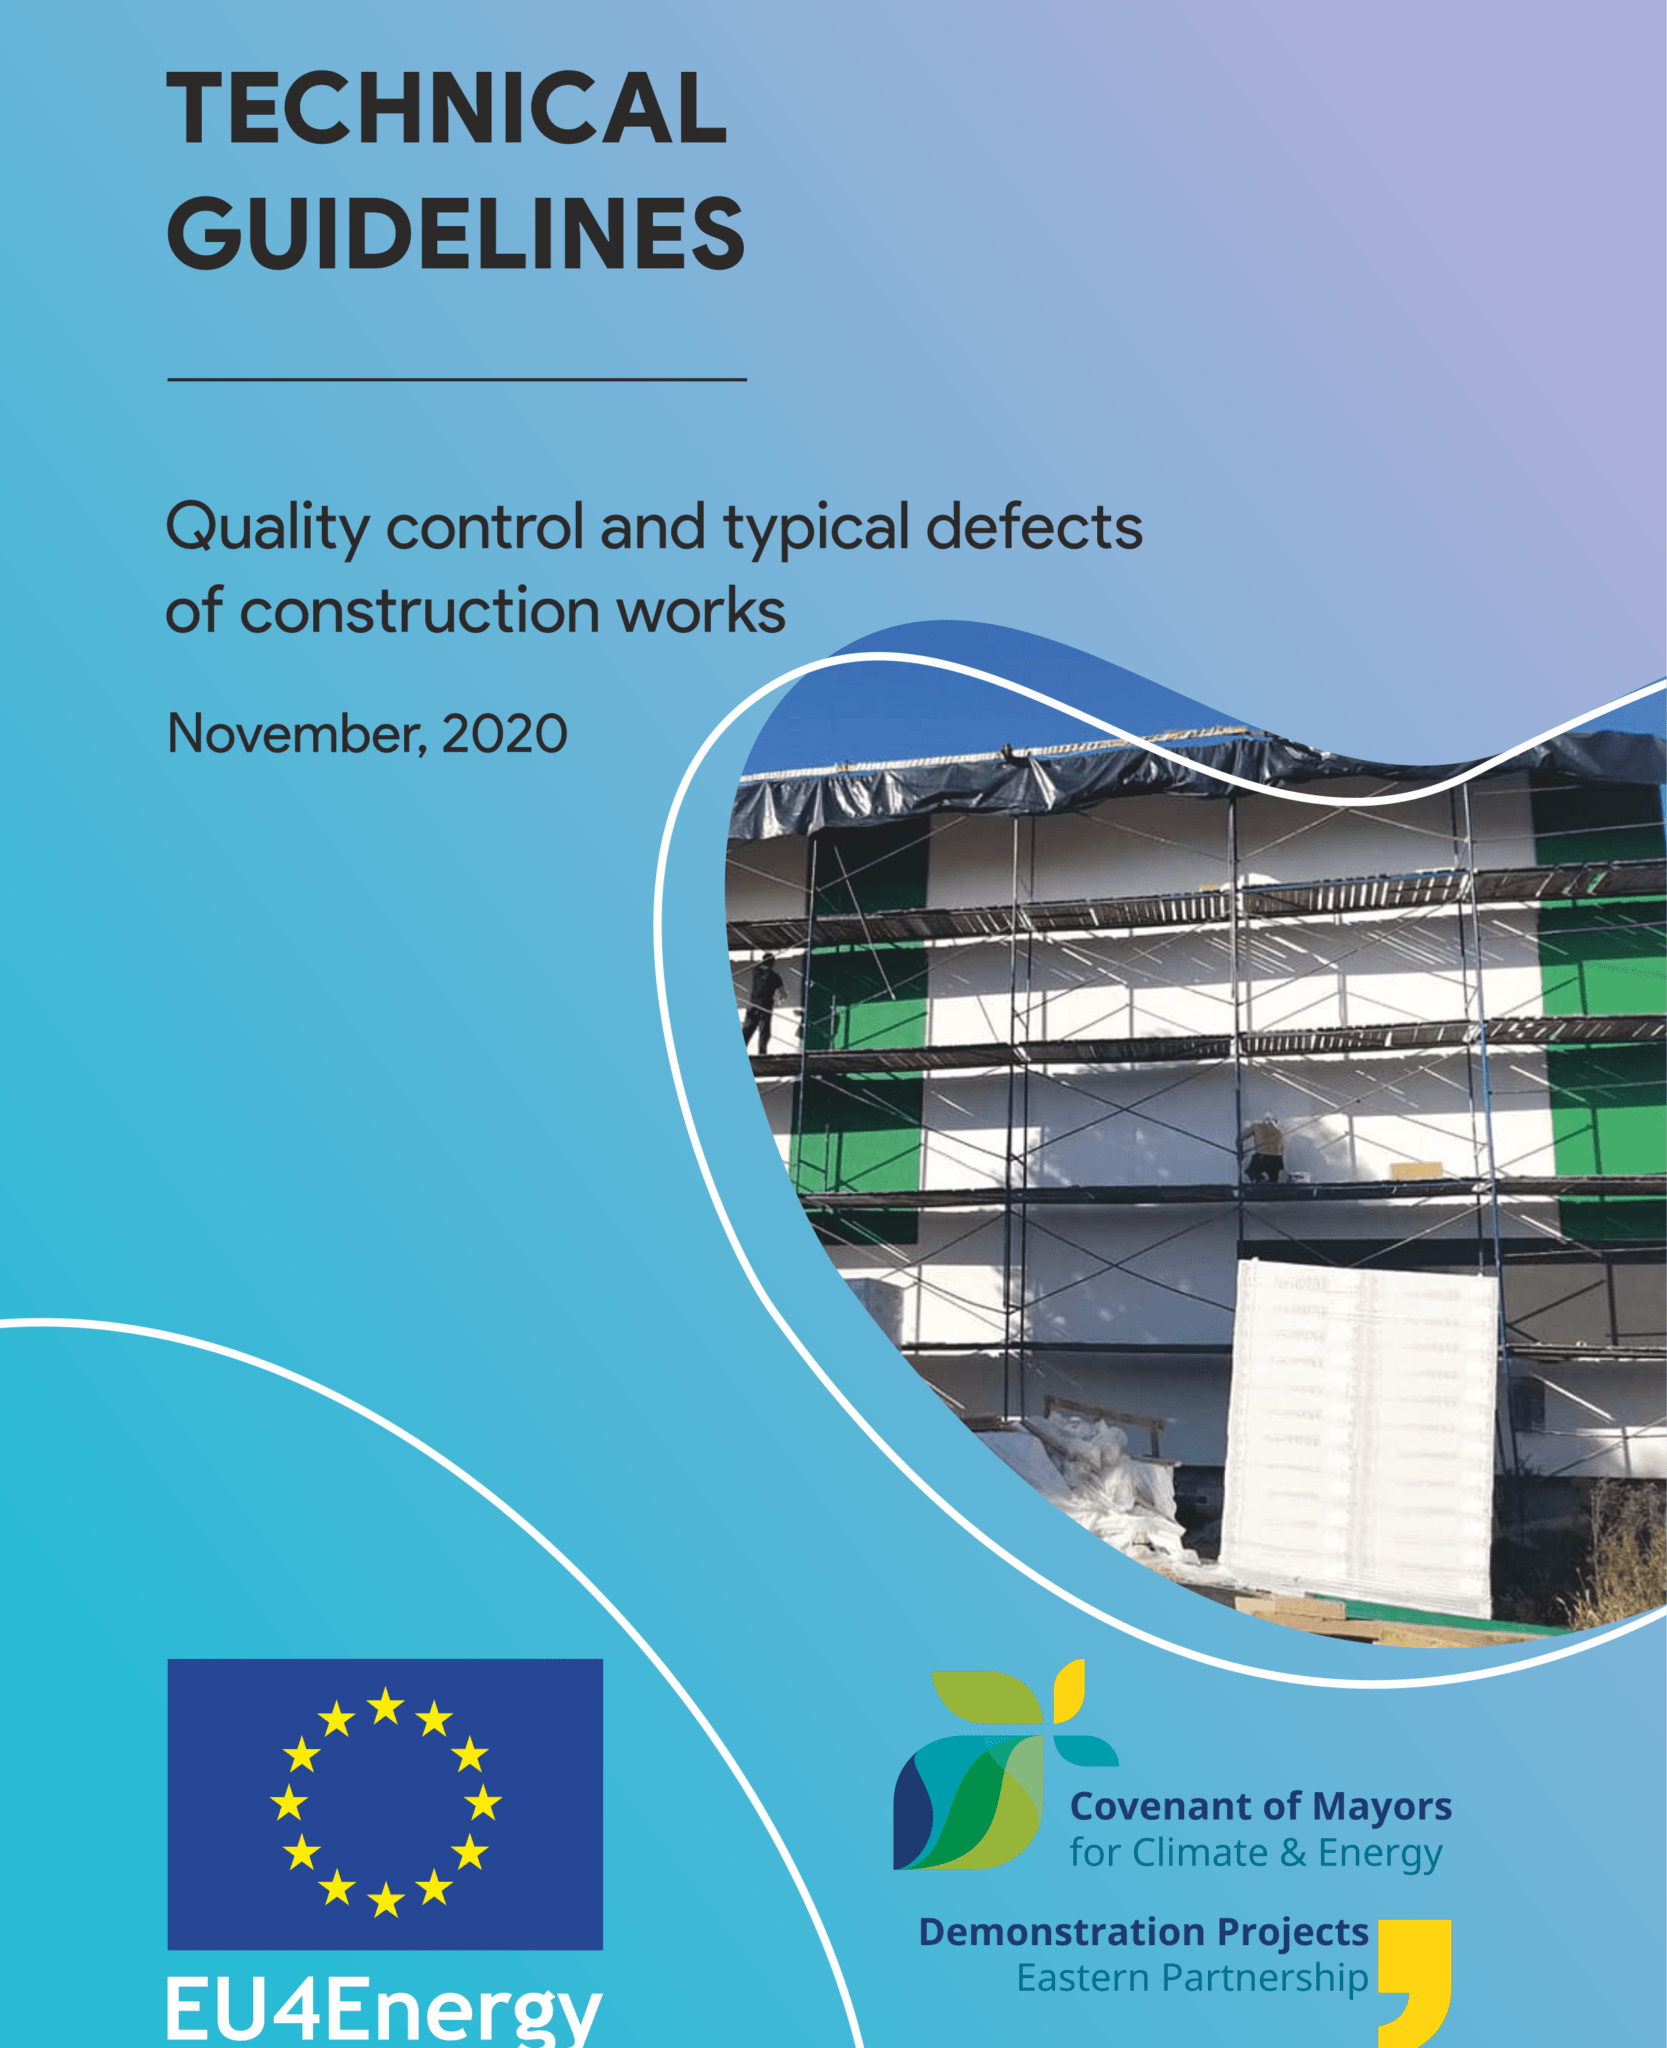 Quality control and typical defects of construction works